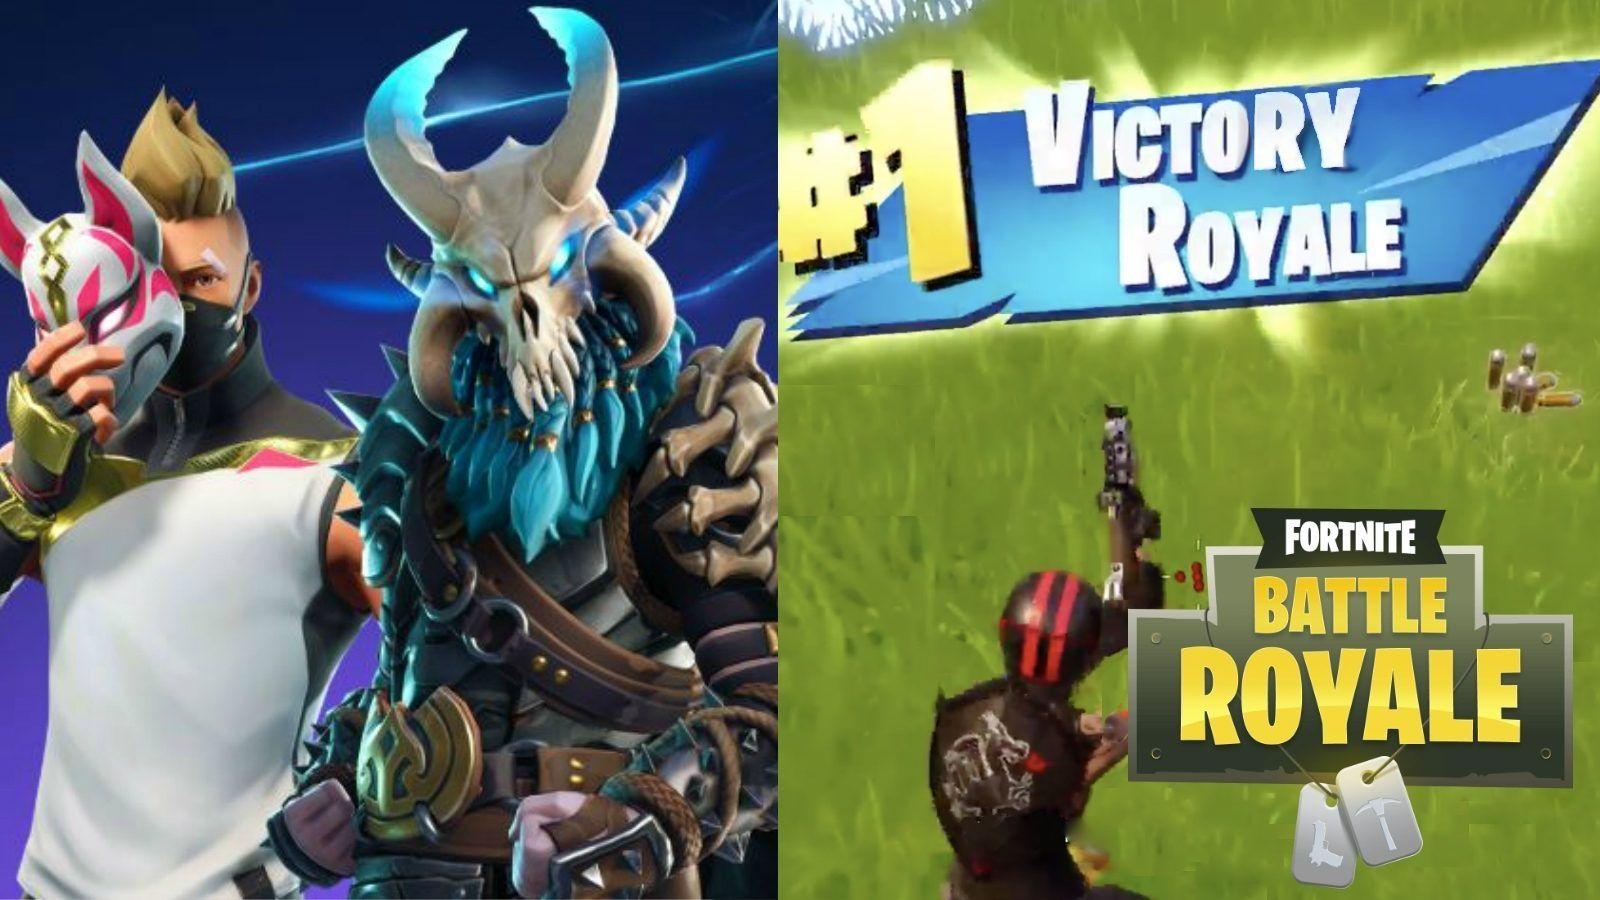 New Fortnite Battle Royale Logo - Brand New Fortnite Victory Royale Screen and Slow-Mo Animation ...